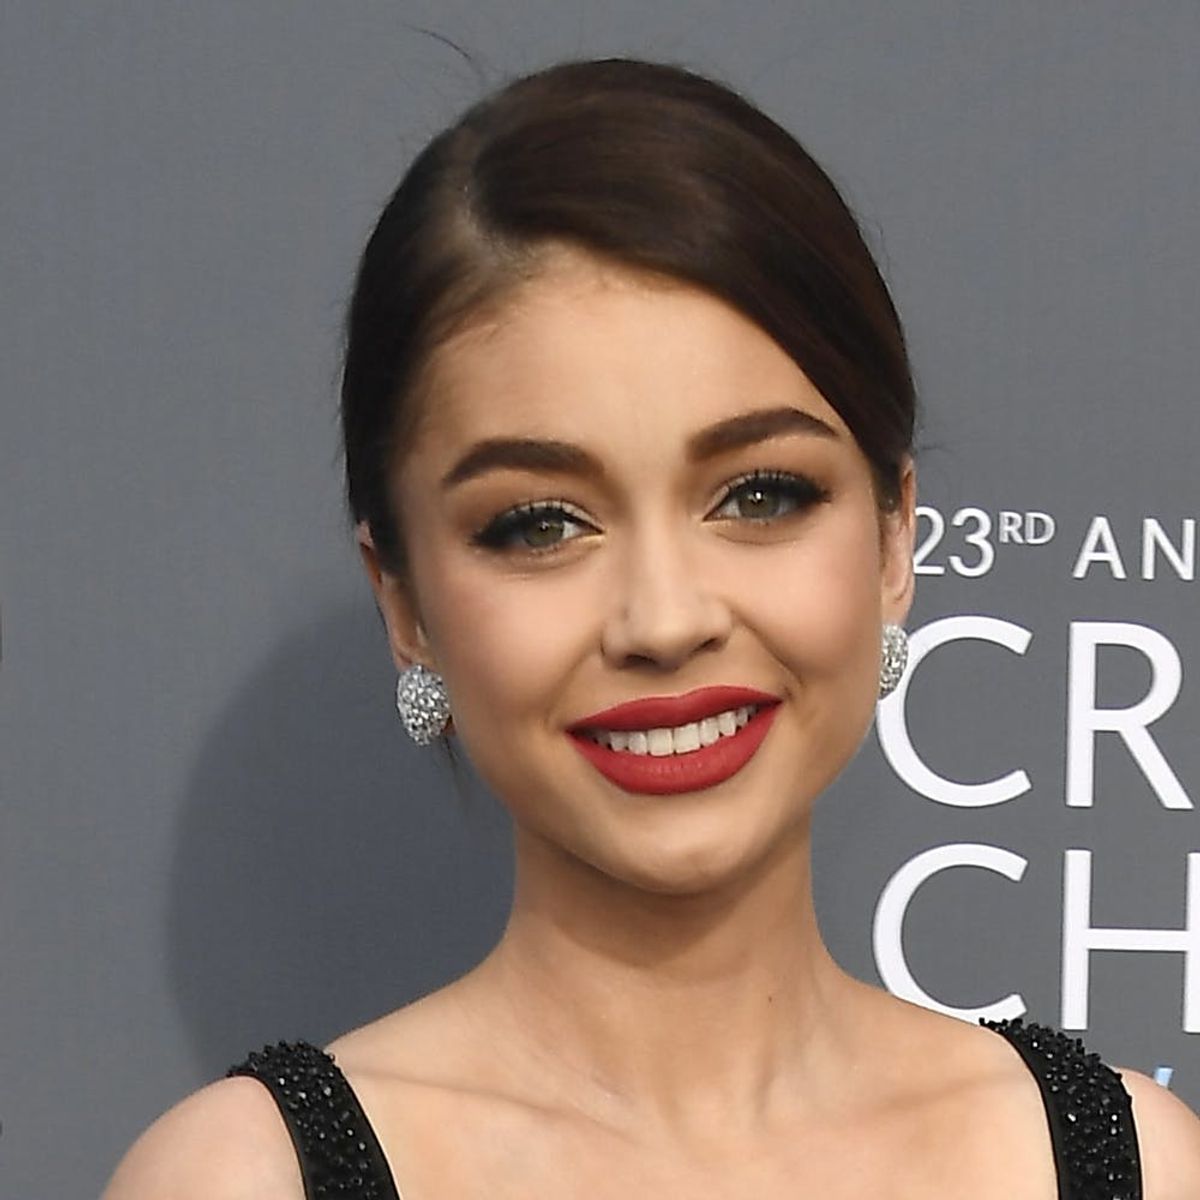 Audrey Hepburn and Edie Sedgwick Inspired *These* 2 Hairdos on the Critics’ Choice Carpet